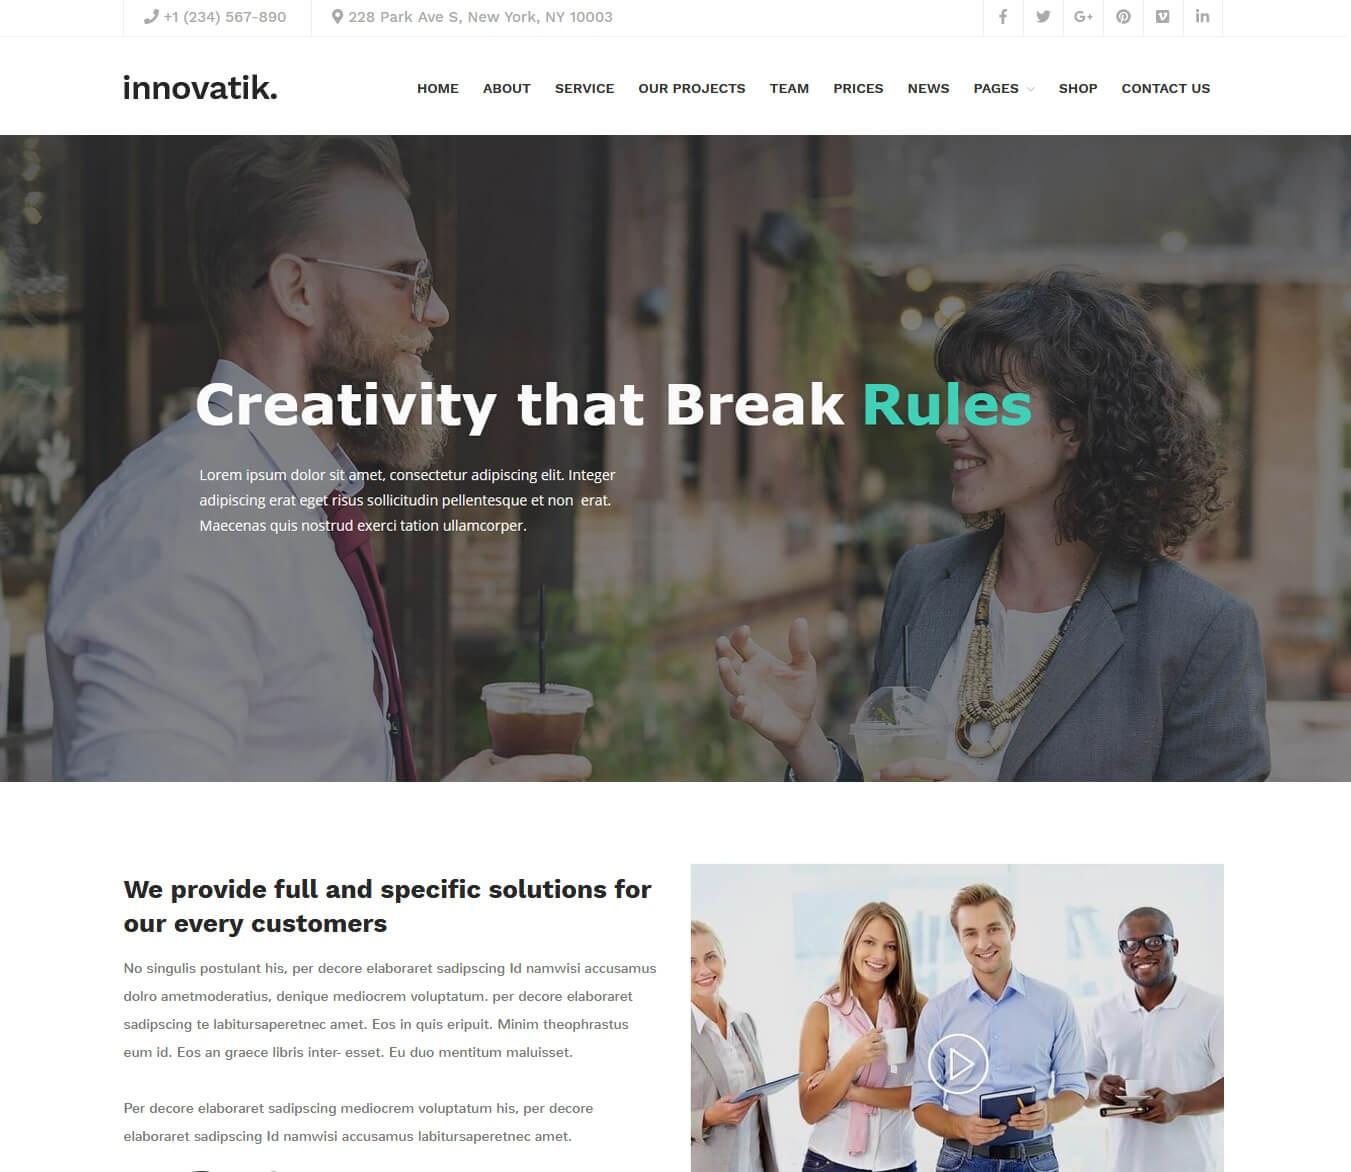 Innovatik - Professional Corporate and Professional Services